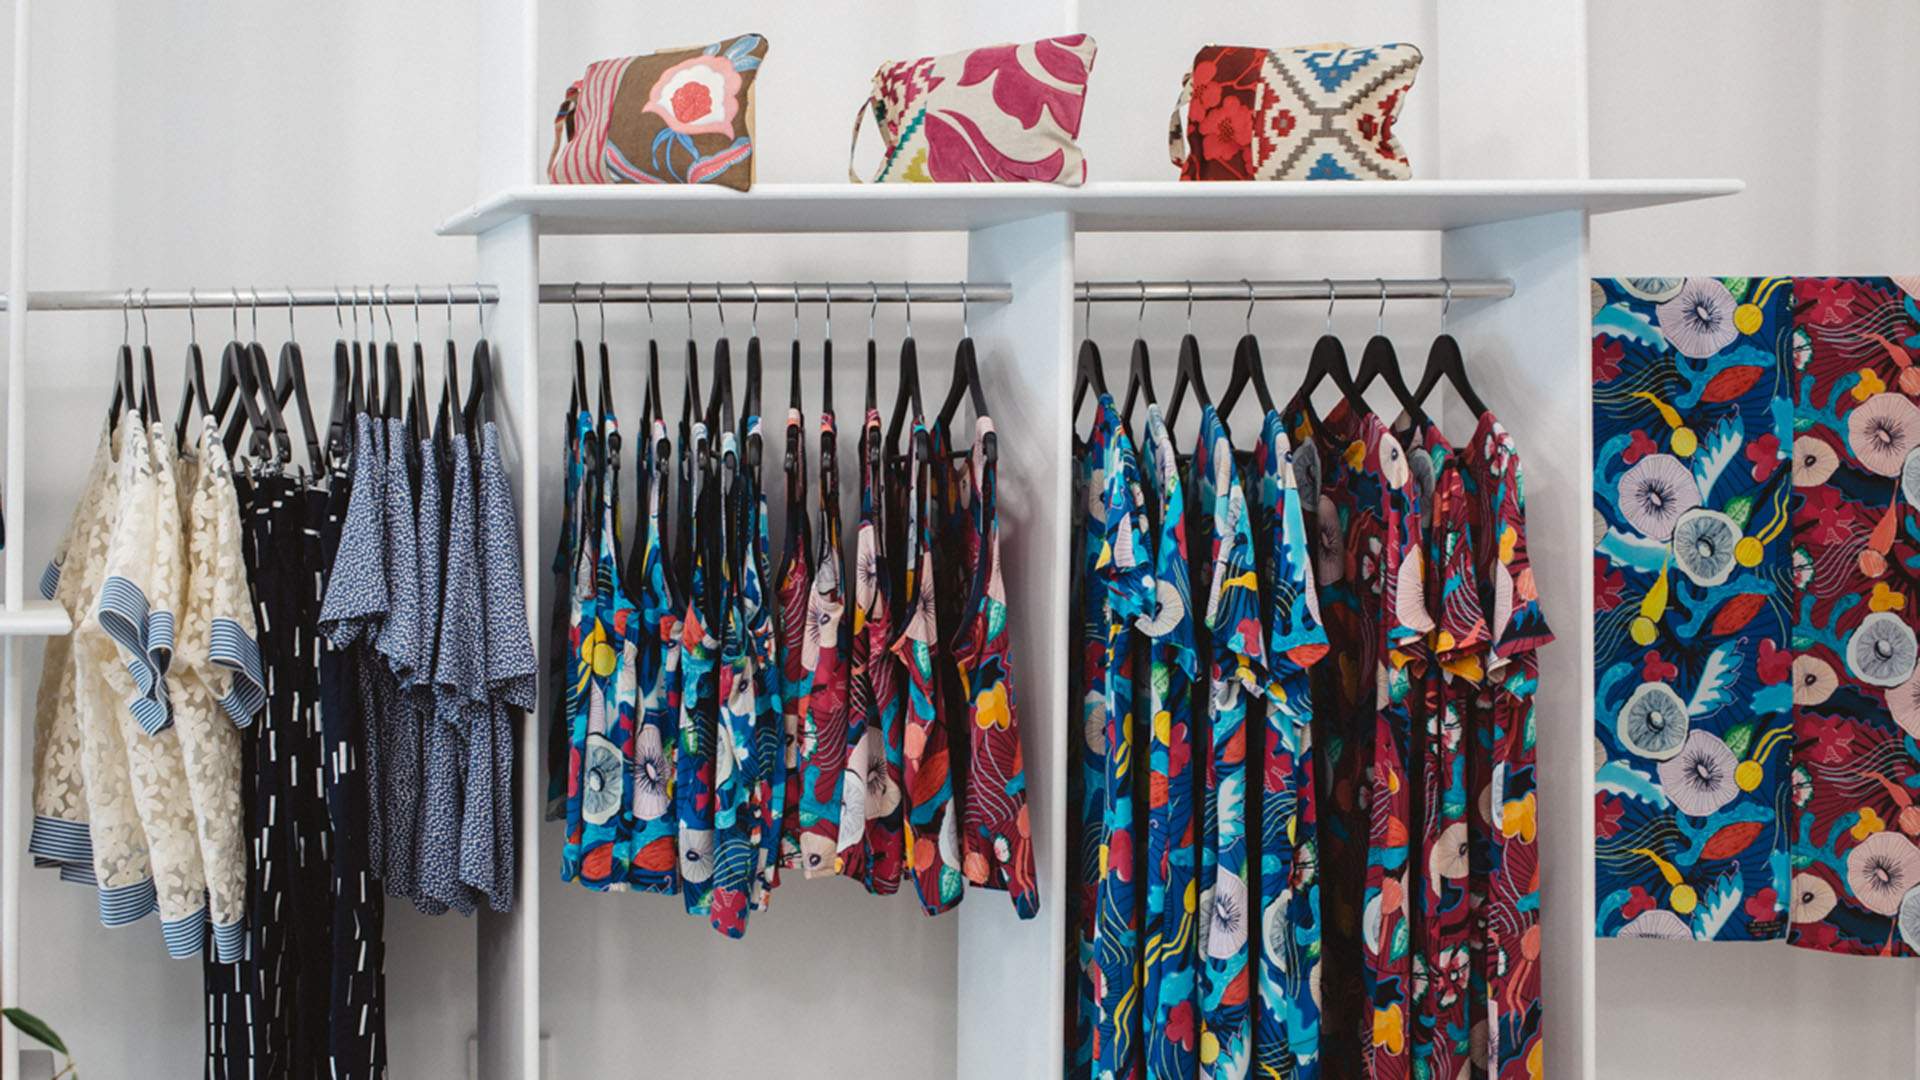 Newtown-Based Fashion Label The Social Outfit Has Opened a Big New Retail Space on King Street